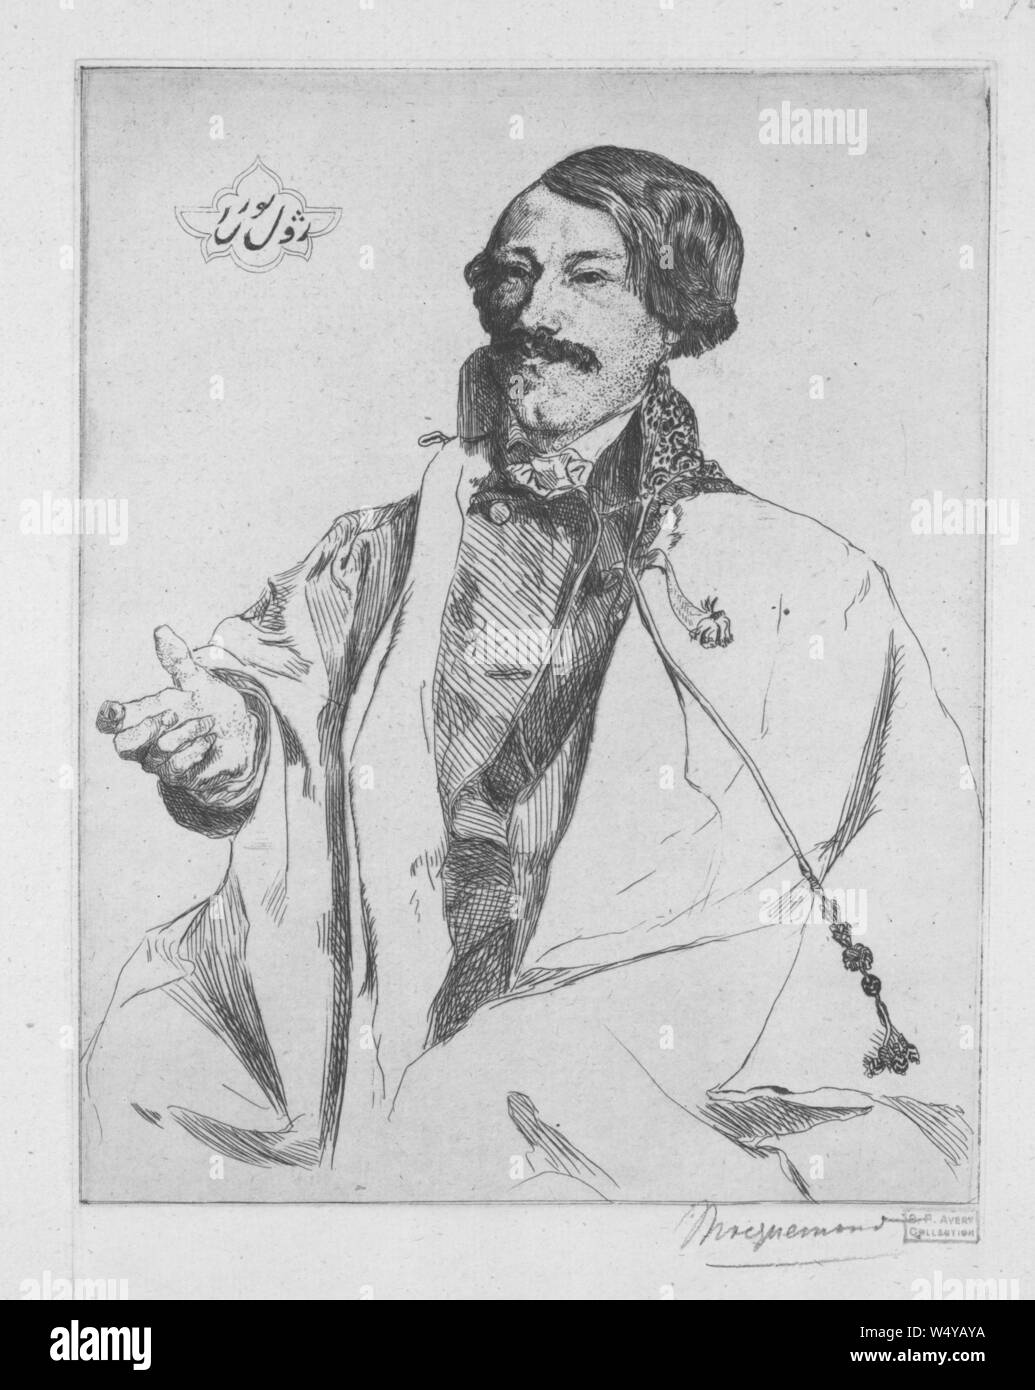 Engraved portrait of Jules Joseph Augustin Laurens, a French painter, and lithographer, illustrated by Felix Henri Bracquemond, 1853. () Stock Photo